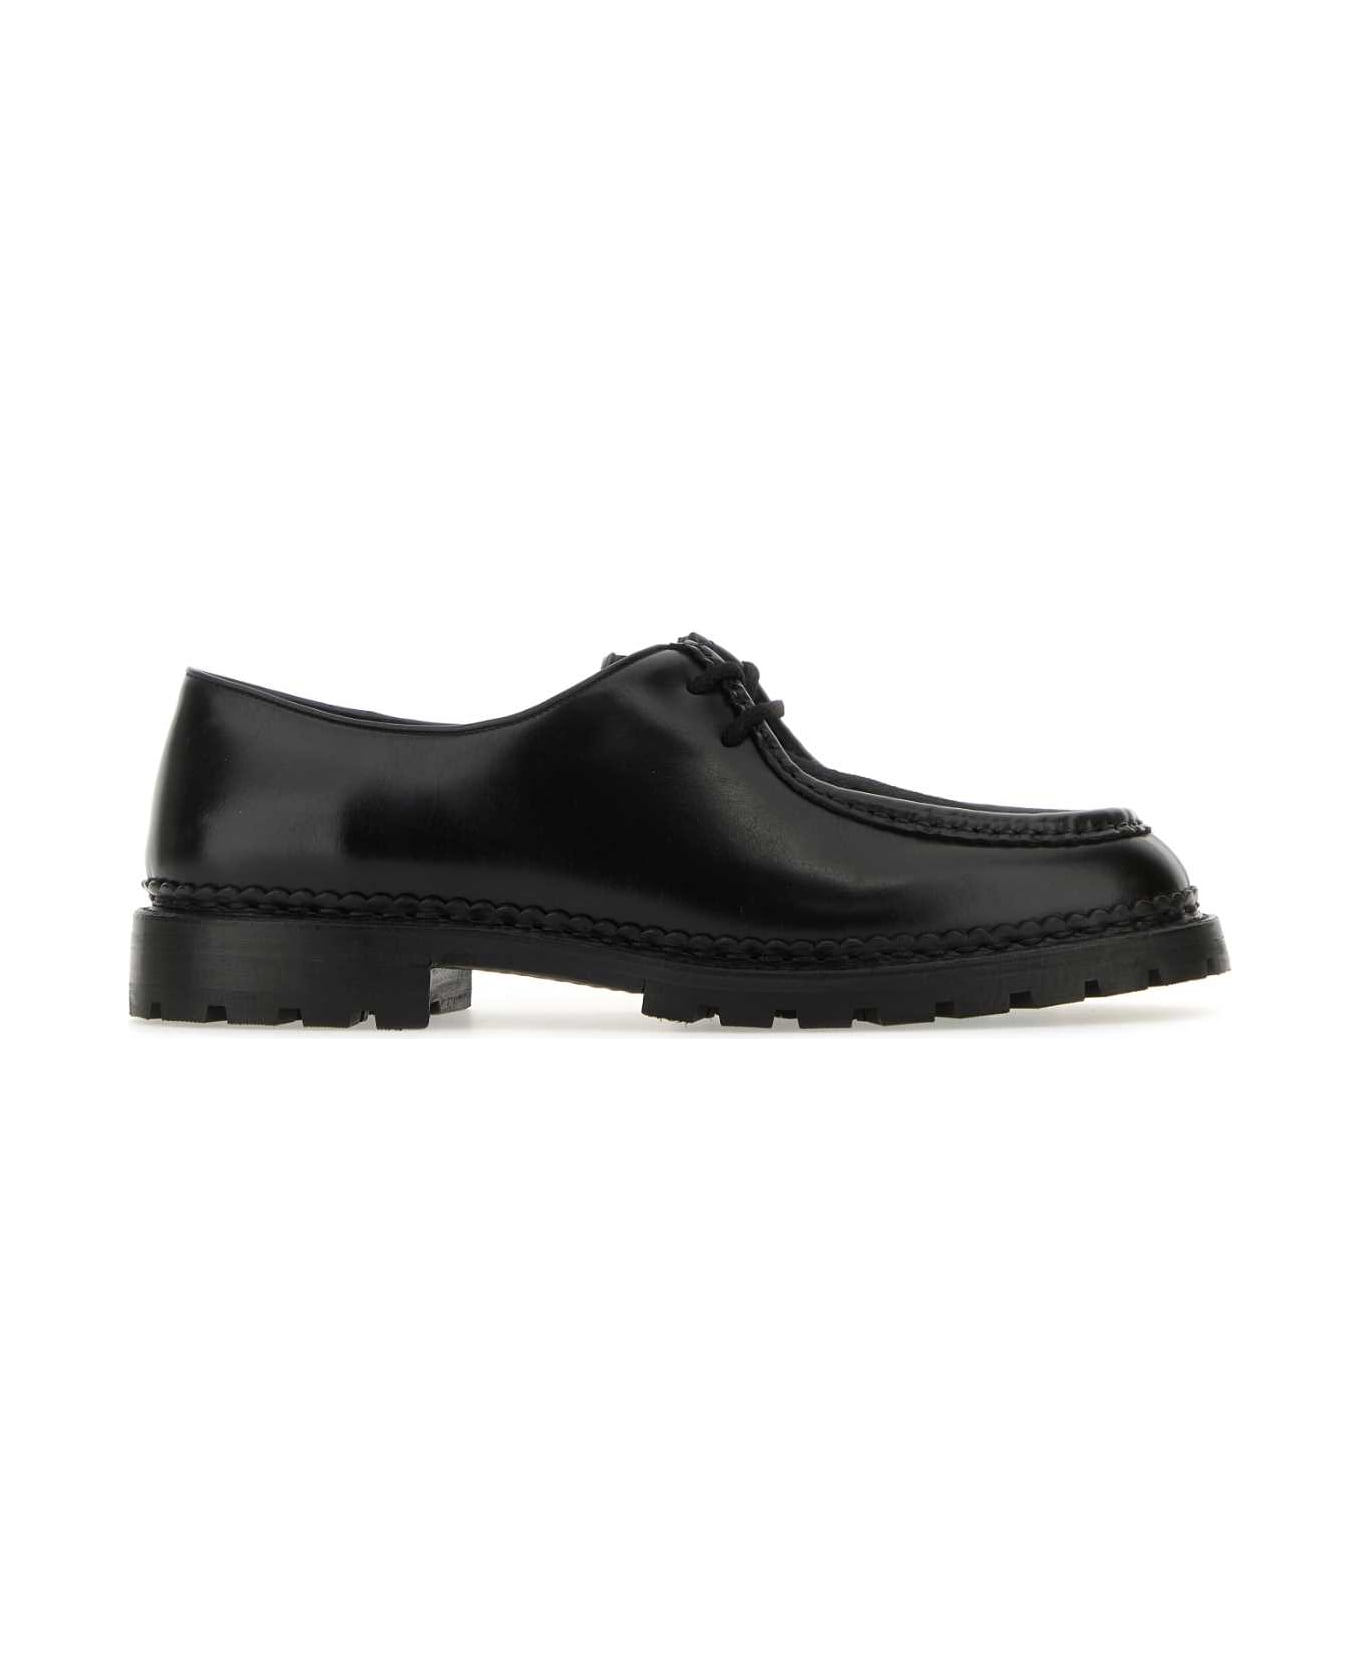 Saint Laurent Leather And Calf Hair Lace-up Shoes - NERONERONERO ローファー＆デッキシューズ